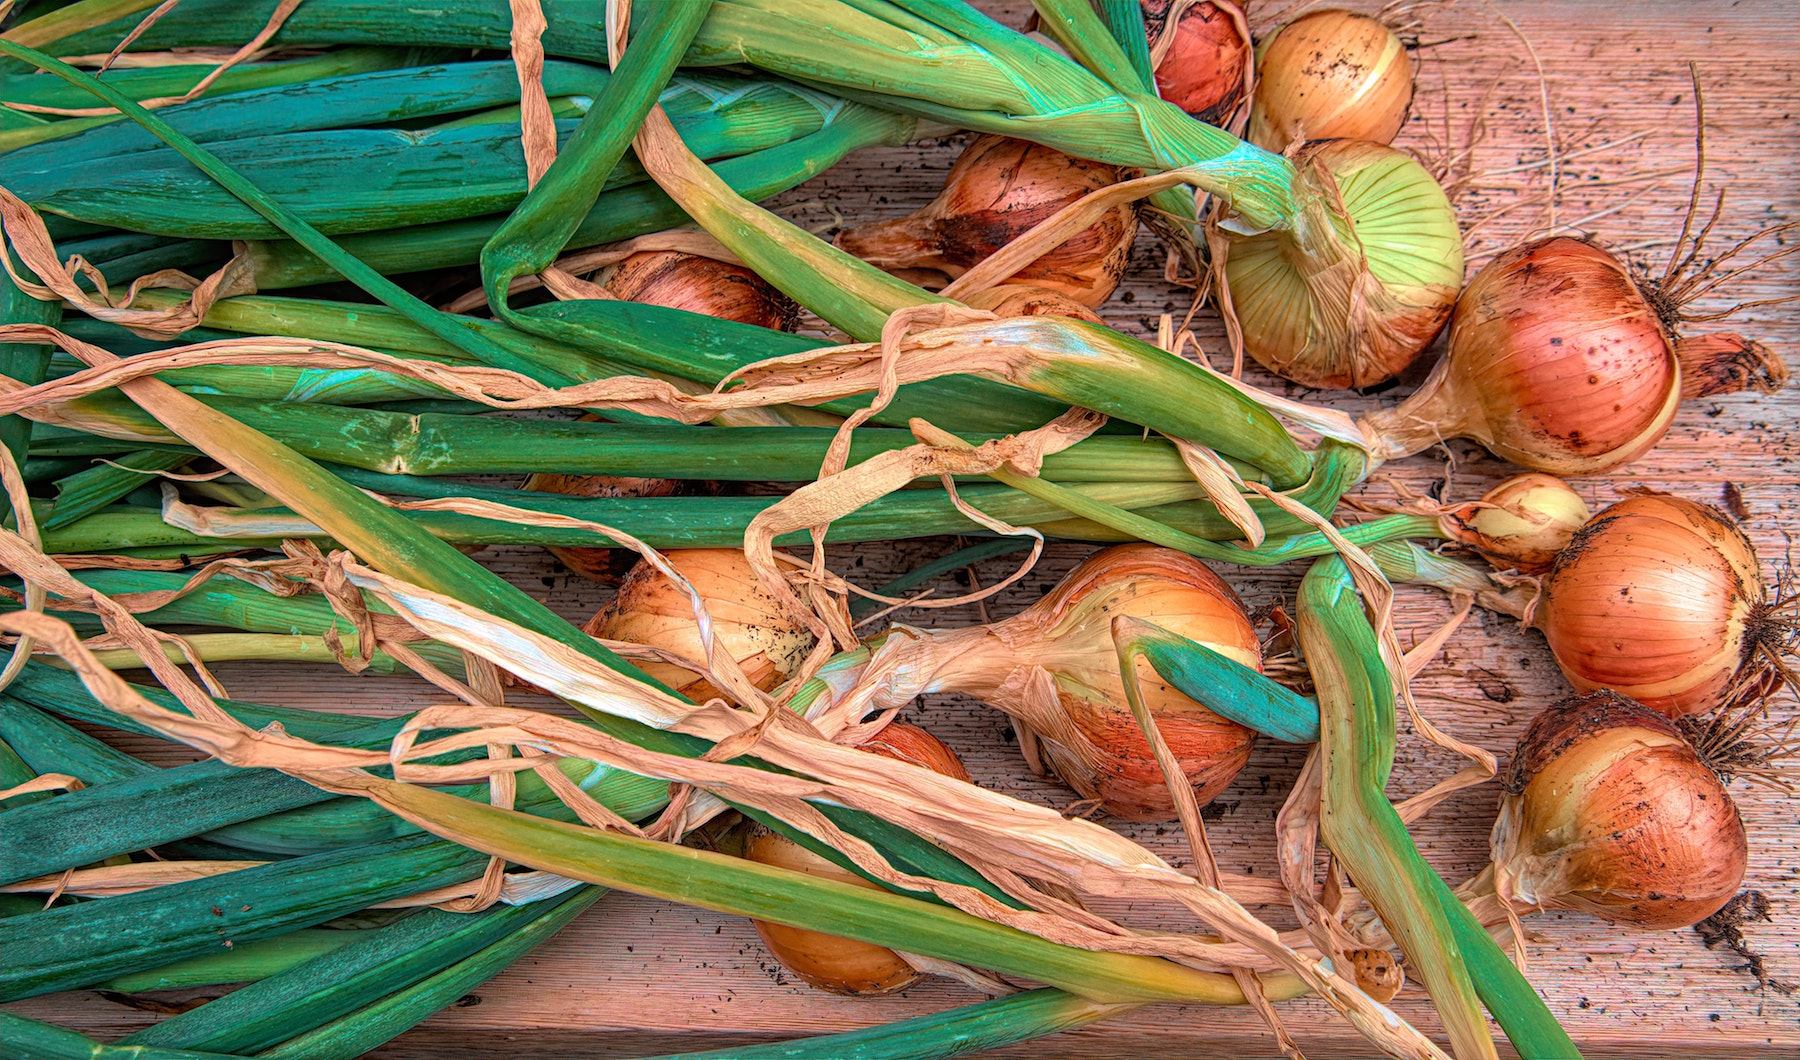 Plant Onions in September